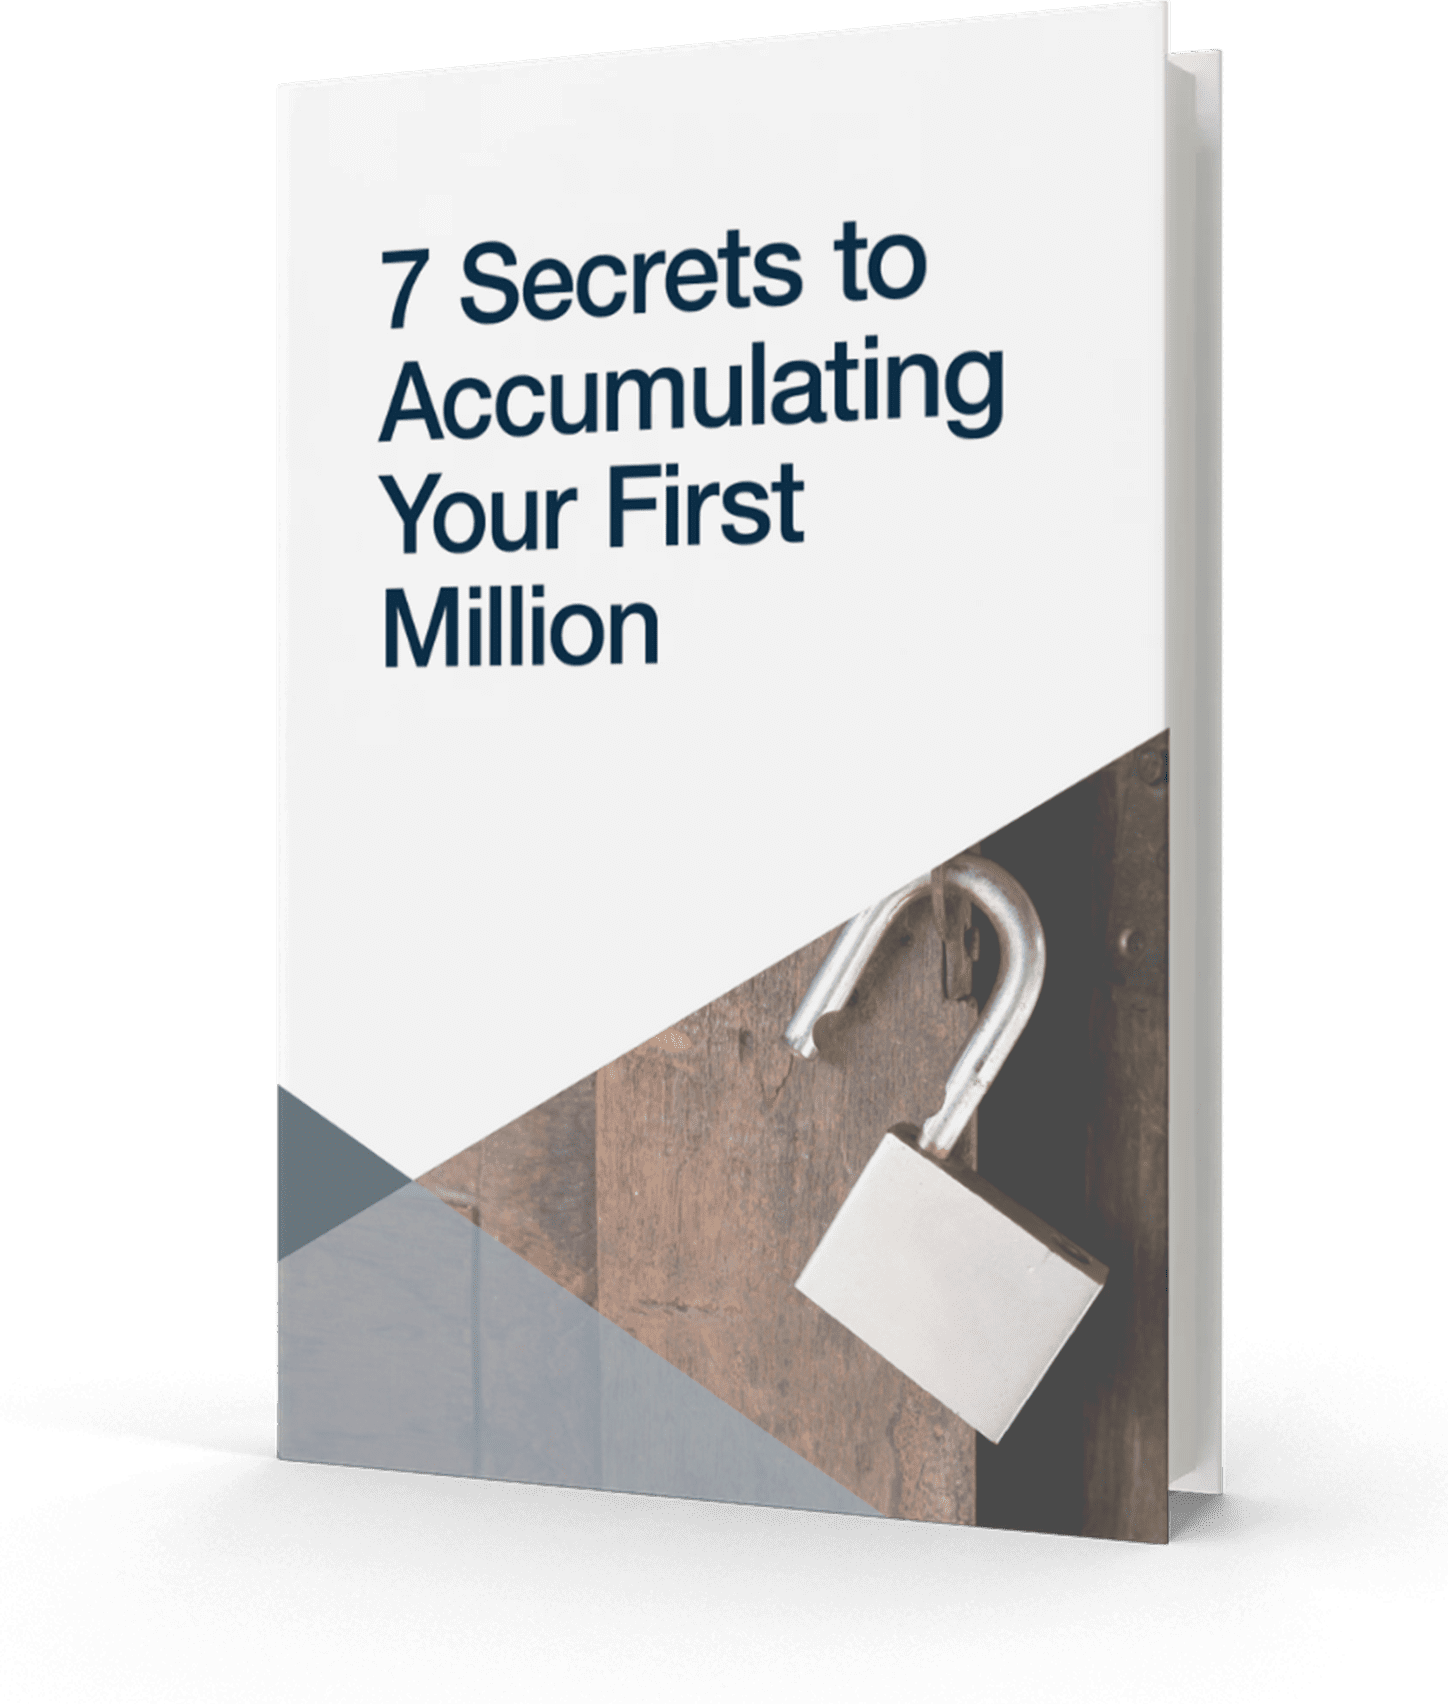 7 Secrets to Accumulating Your First Million